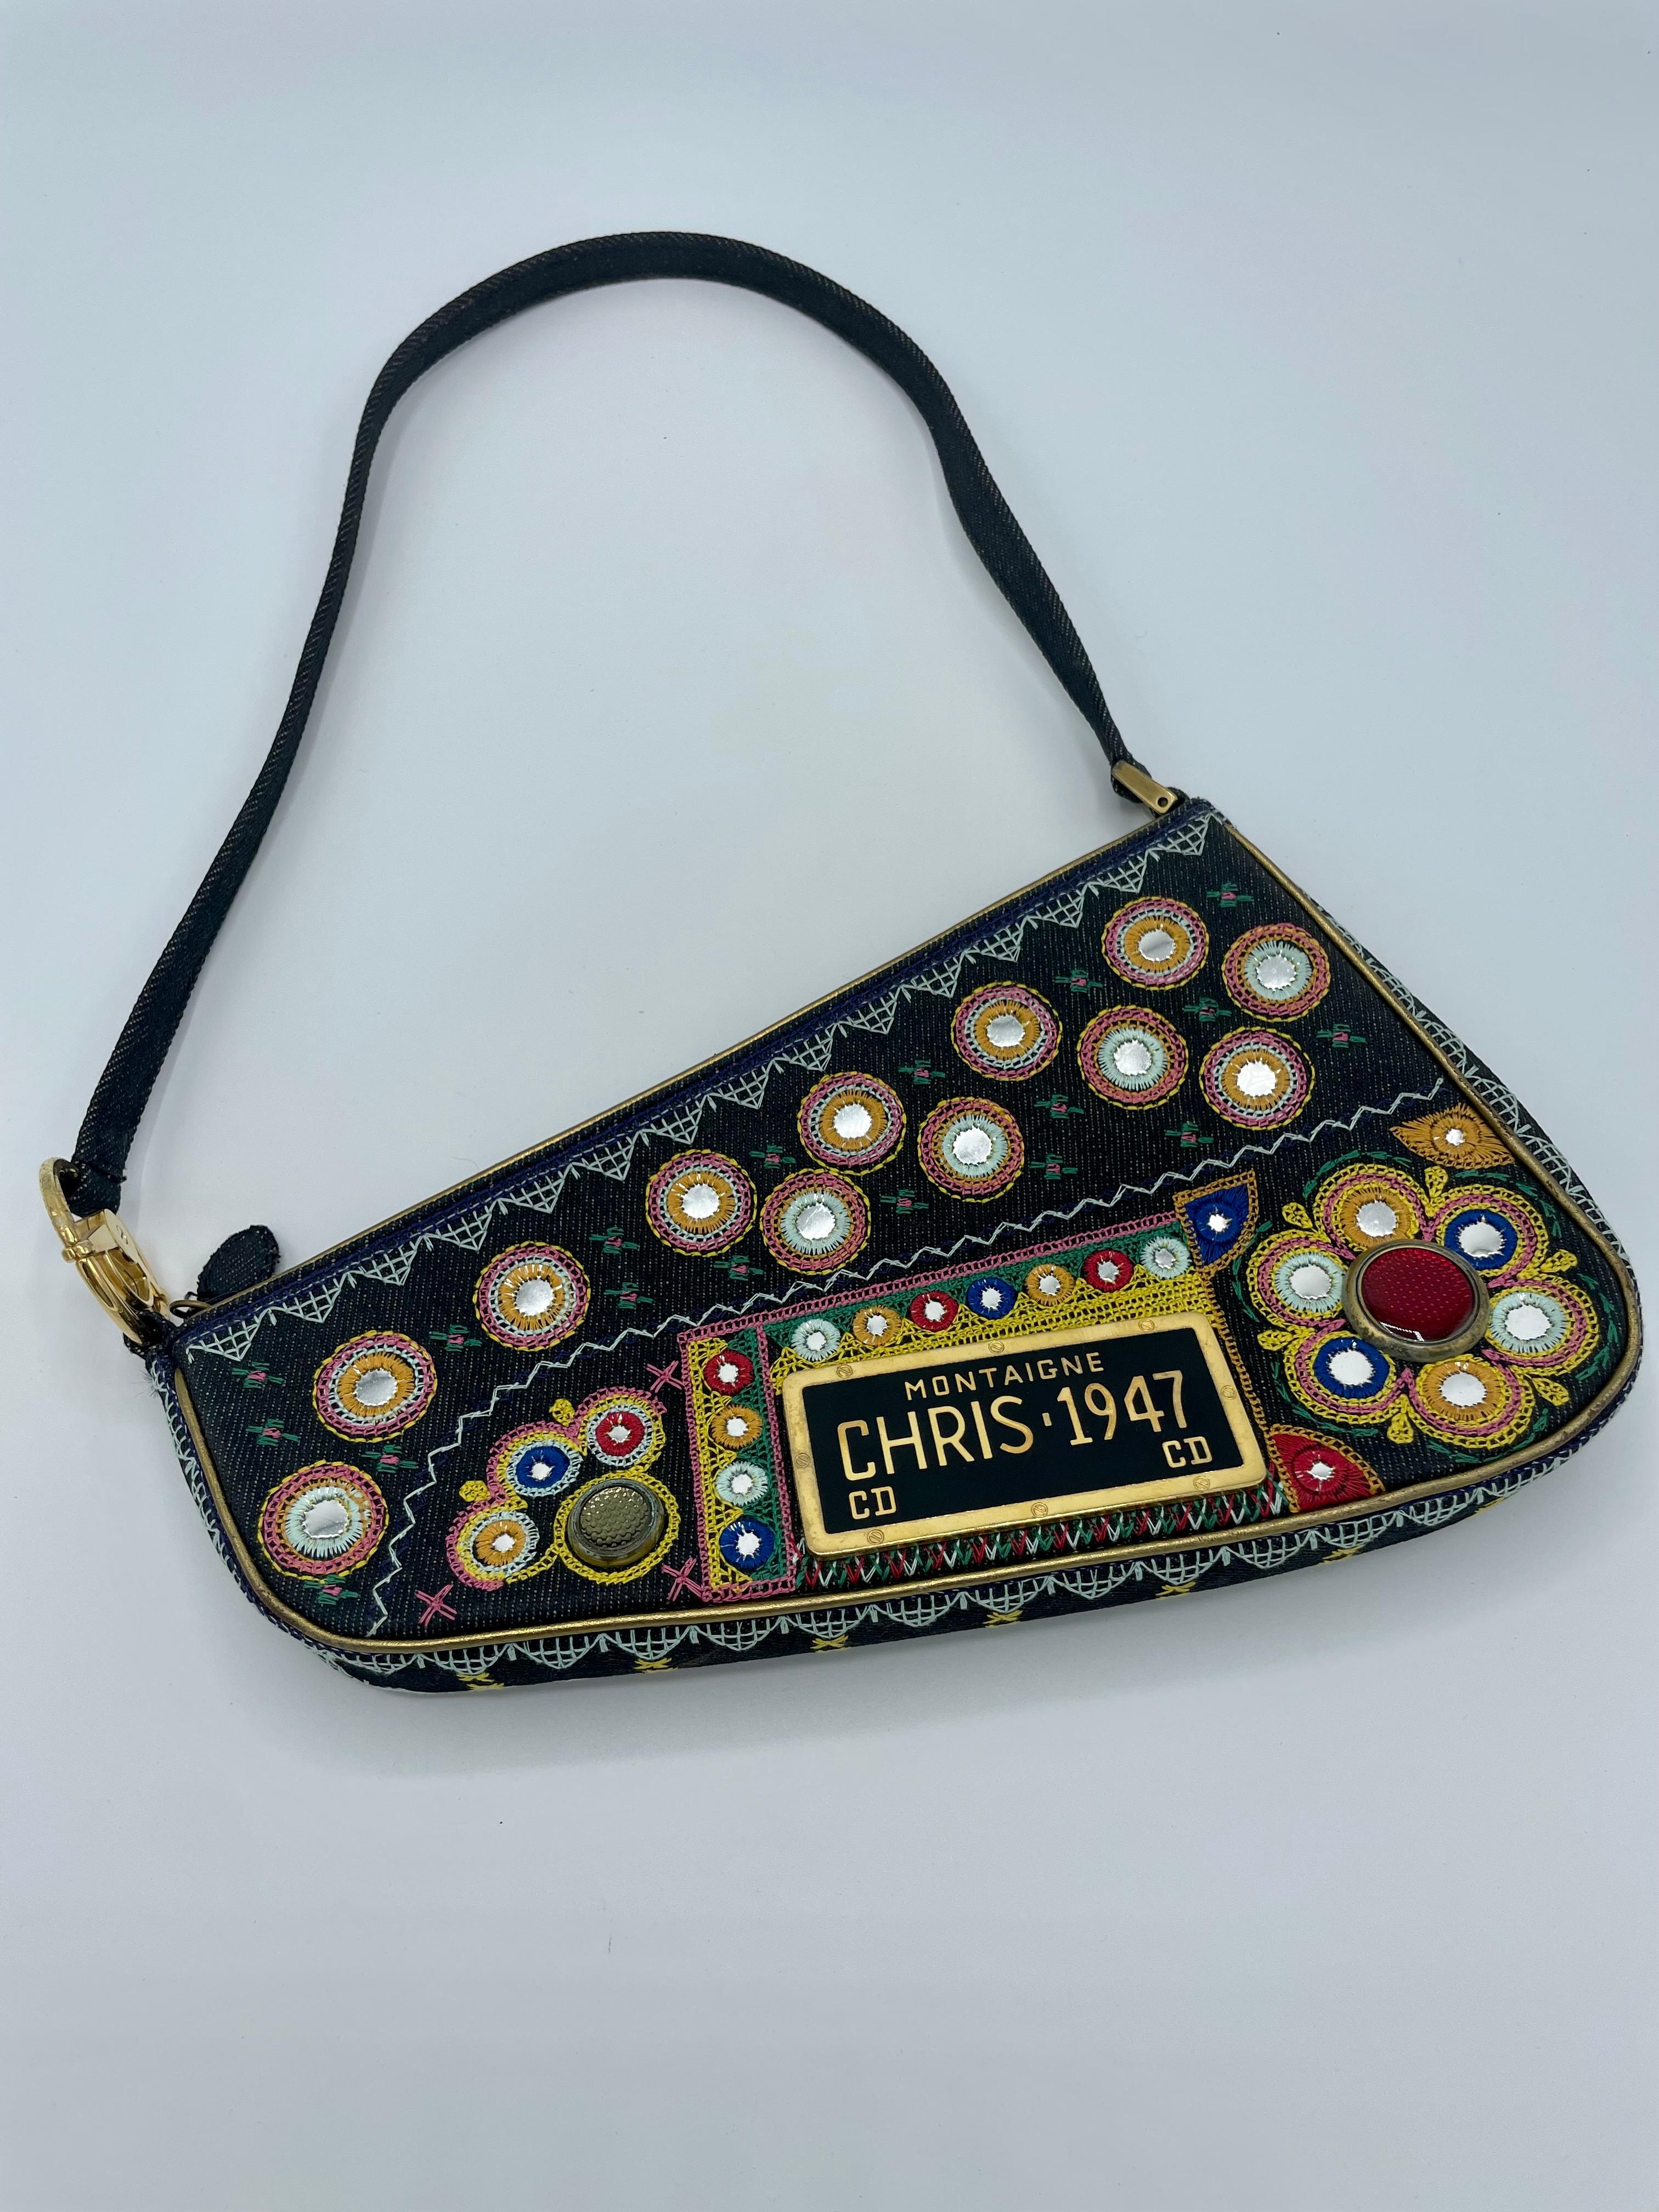 In excellent condition. The outside is embellished with mirror decorations, vibrant embroidery, and a Montaigne Chris 1947 emblem. The design is comprised of a single handle and nylon lining. Jeans tote by Maison CHRISTIAN DIOR embroidered with